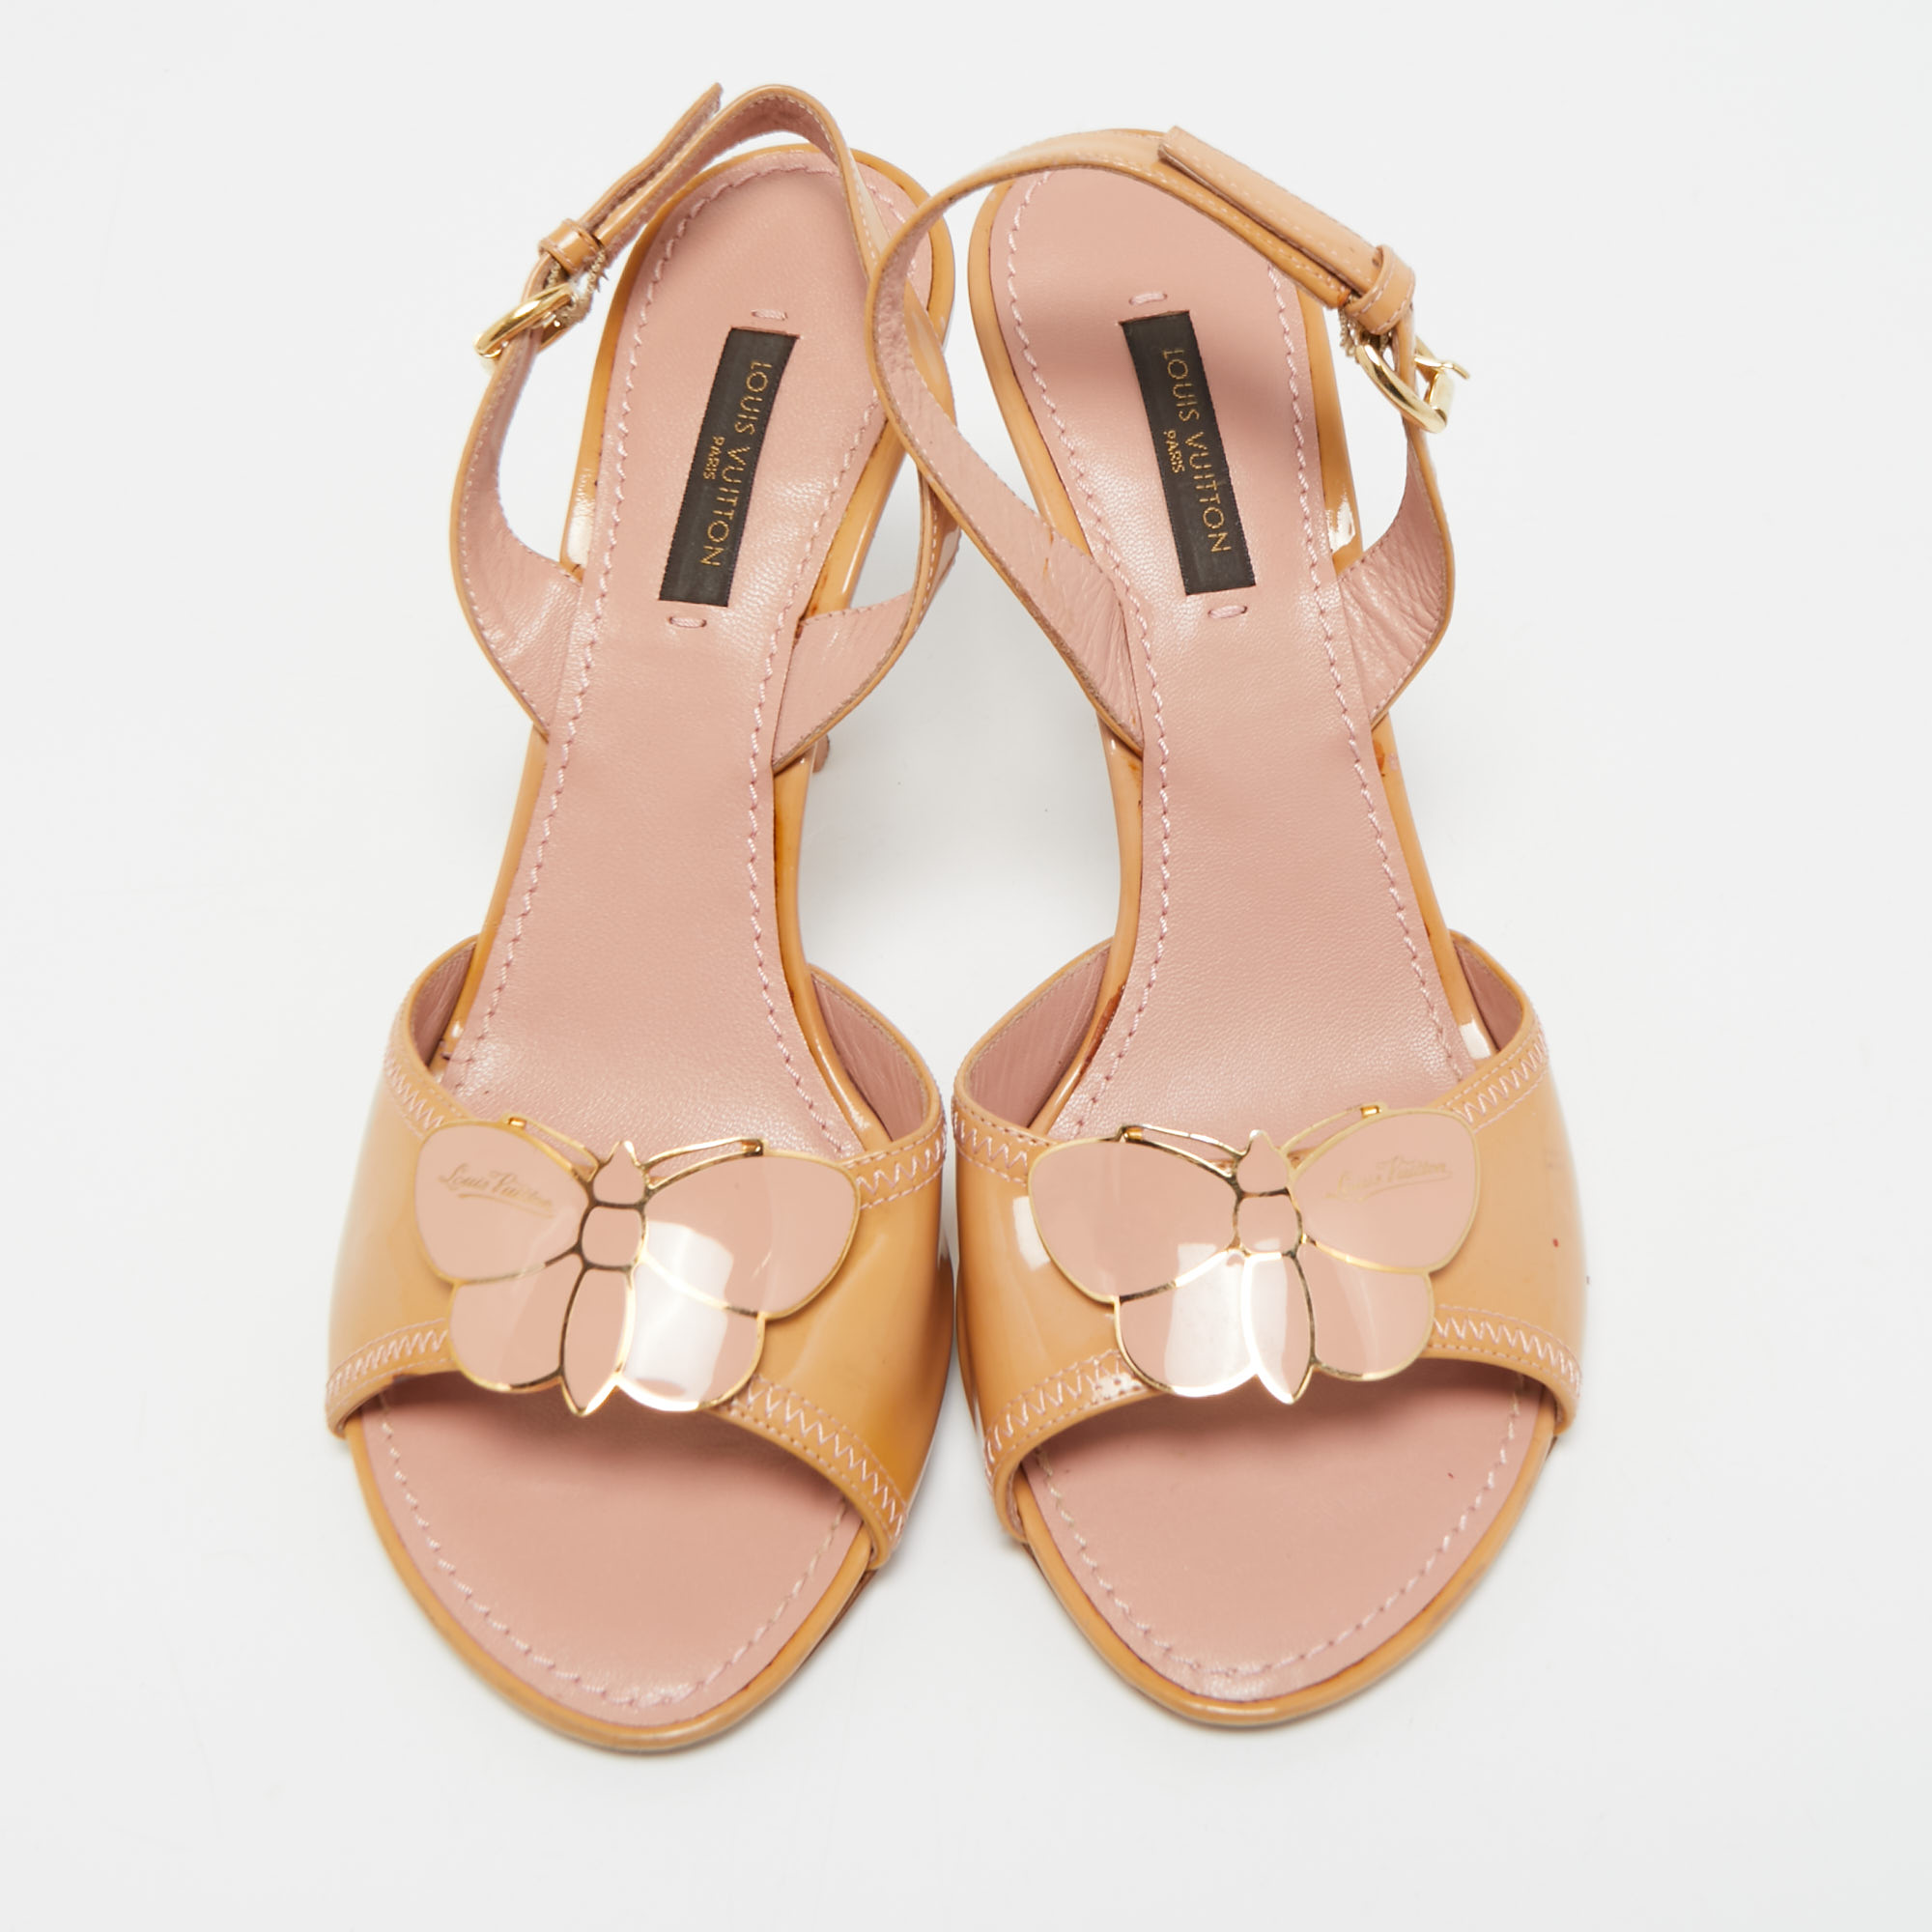 Louis Vuitton Beige Patent Leather Butterfly Slingback Sandals Size 36.5